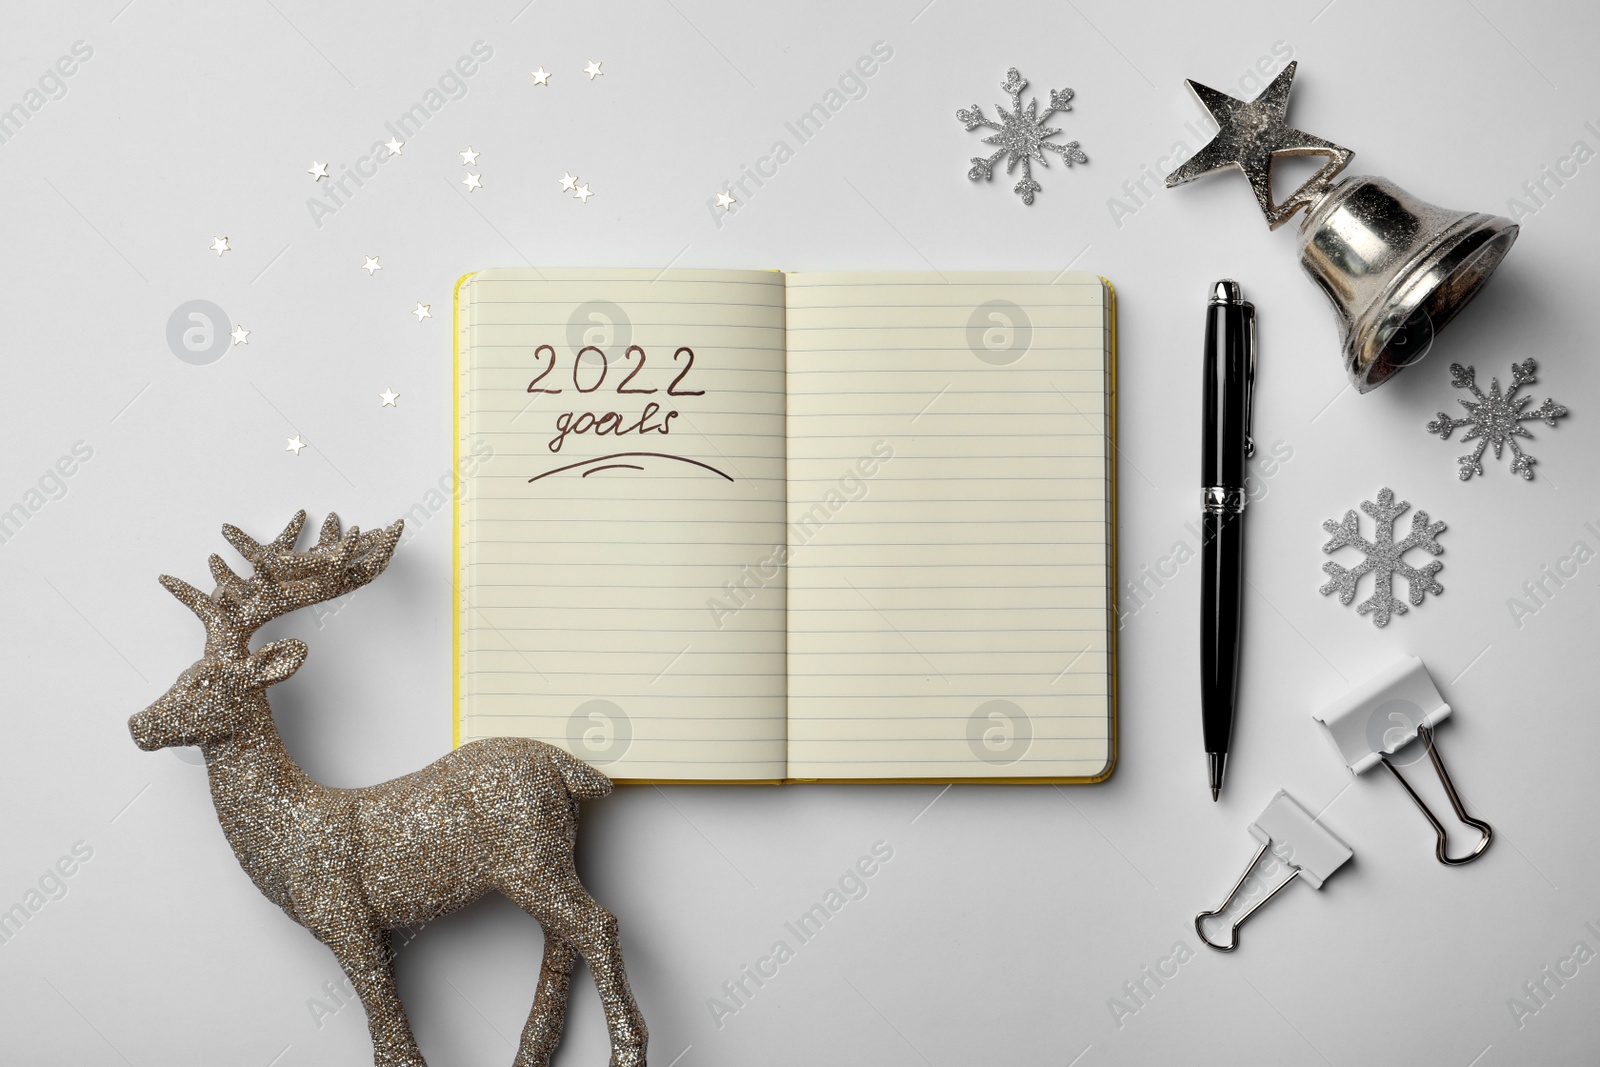 Photo of Inscription 2022 Goals written in planner and Christmas decor on white background, flat lay. New Year aims